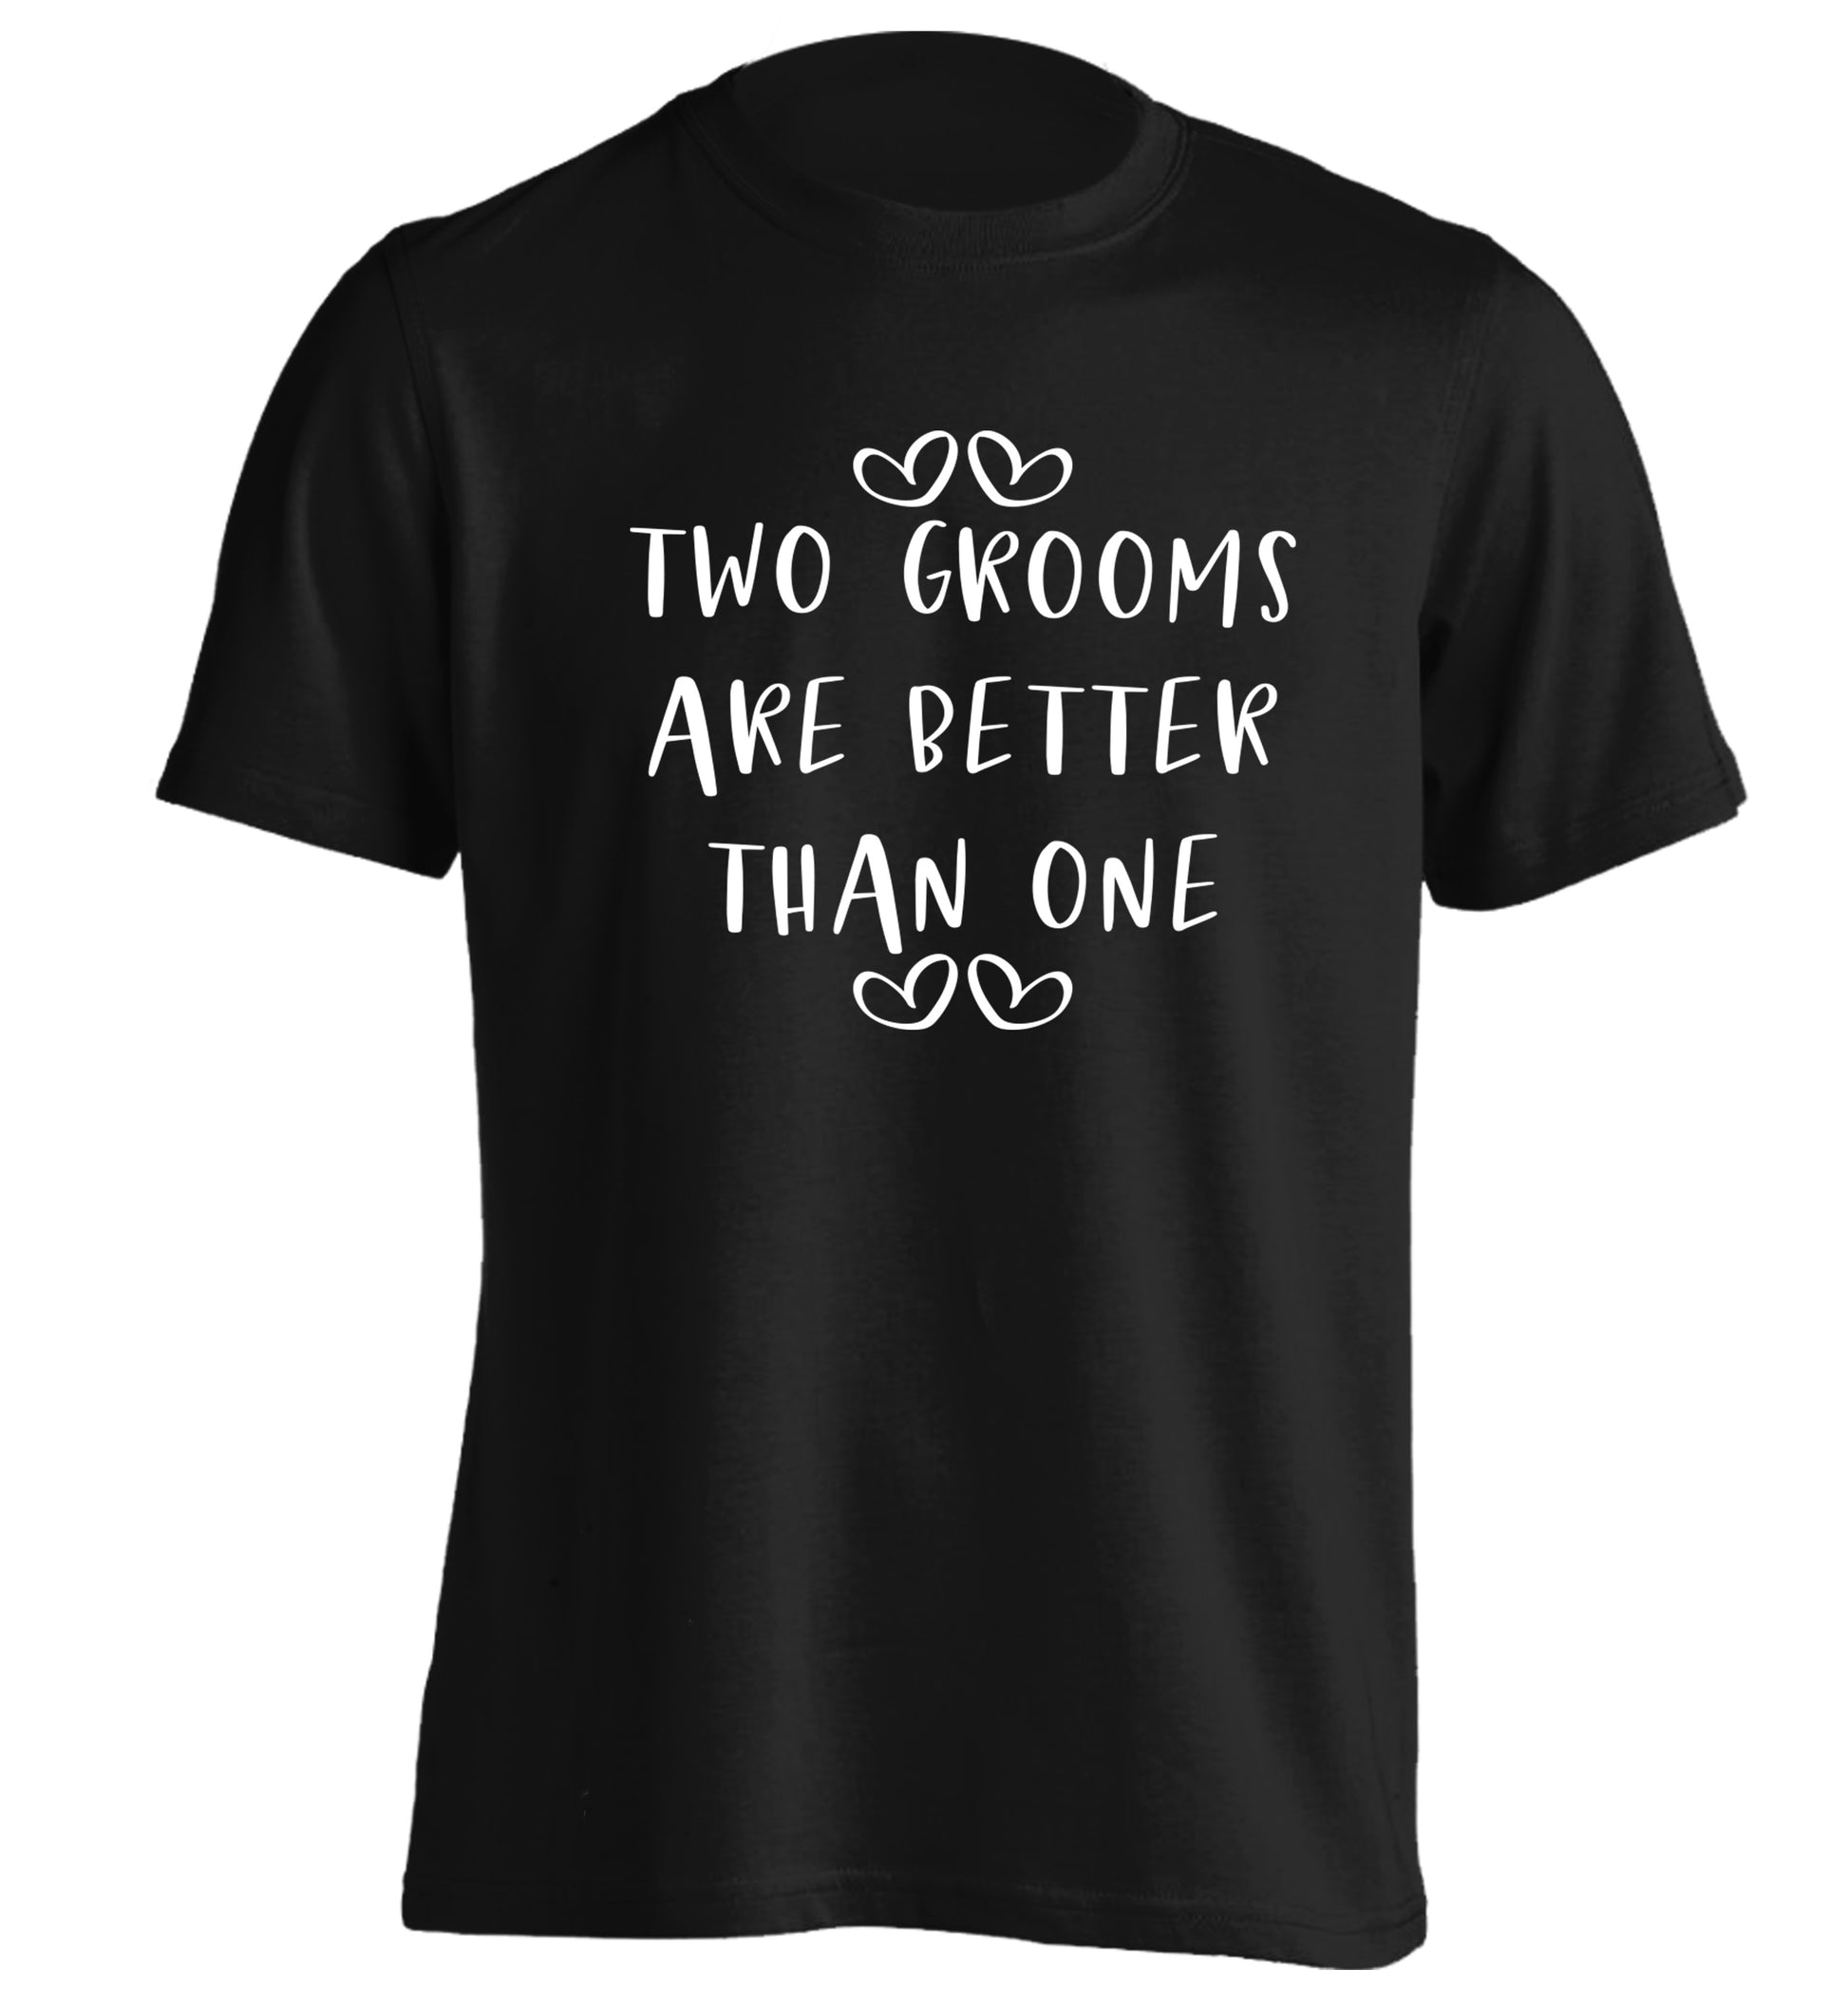 Two grooms are better than one adults unisex black Tshirt 2XL